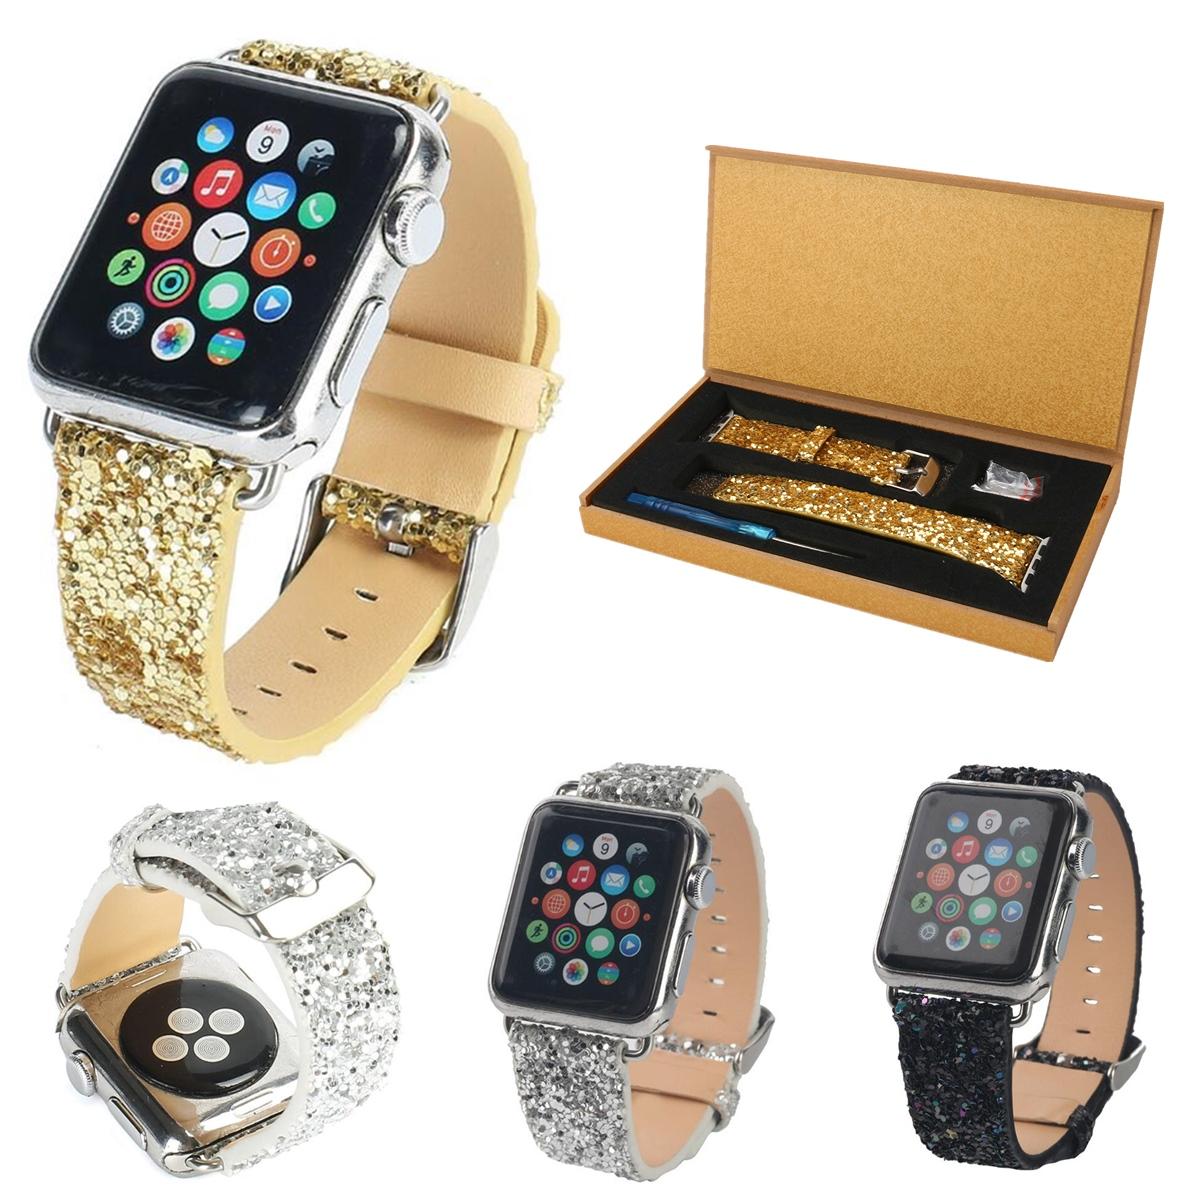 Glitter Watch Band Replacement For Apple Watch Series 1 38mm/42mm COD